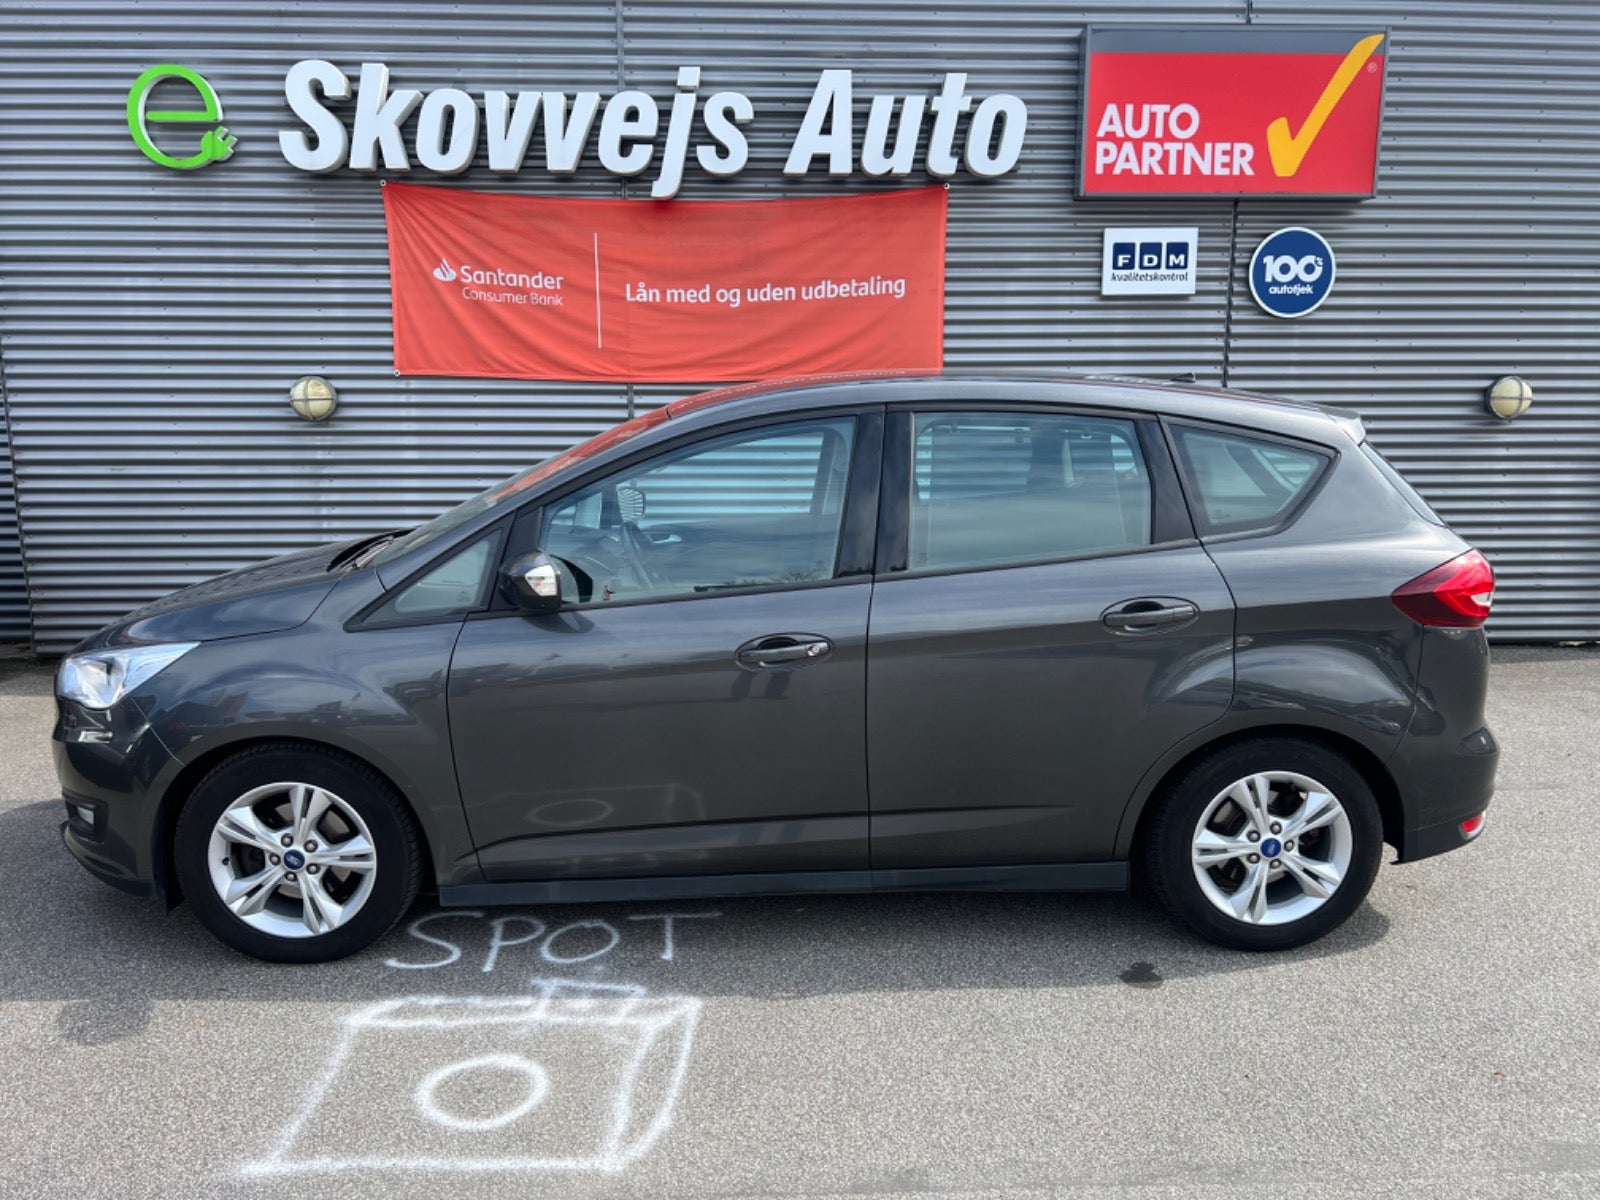 Ford C-MAX 2016